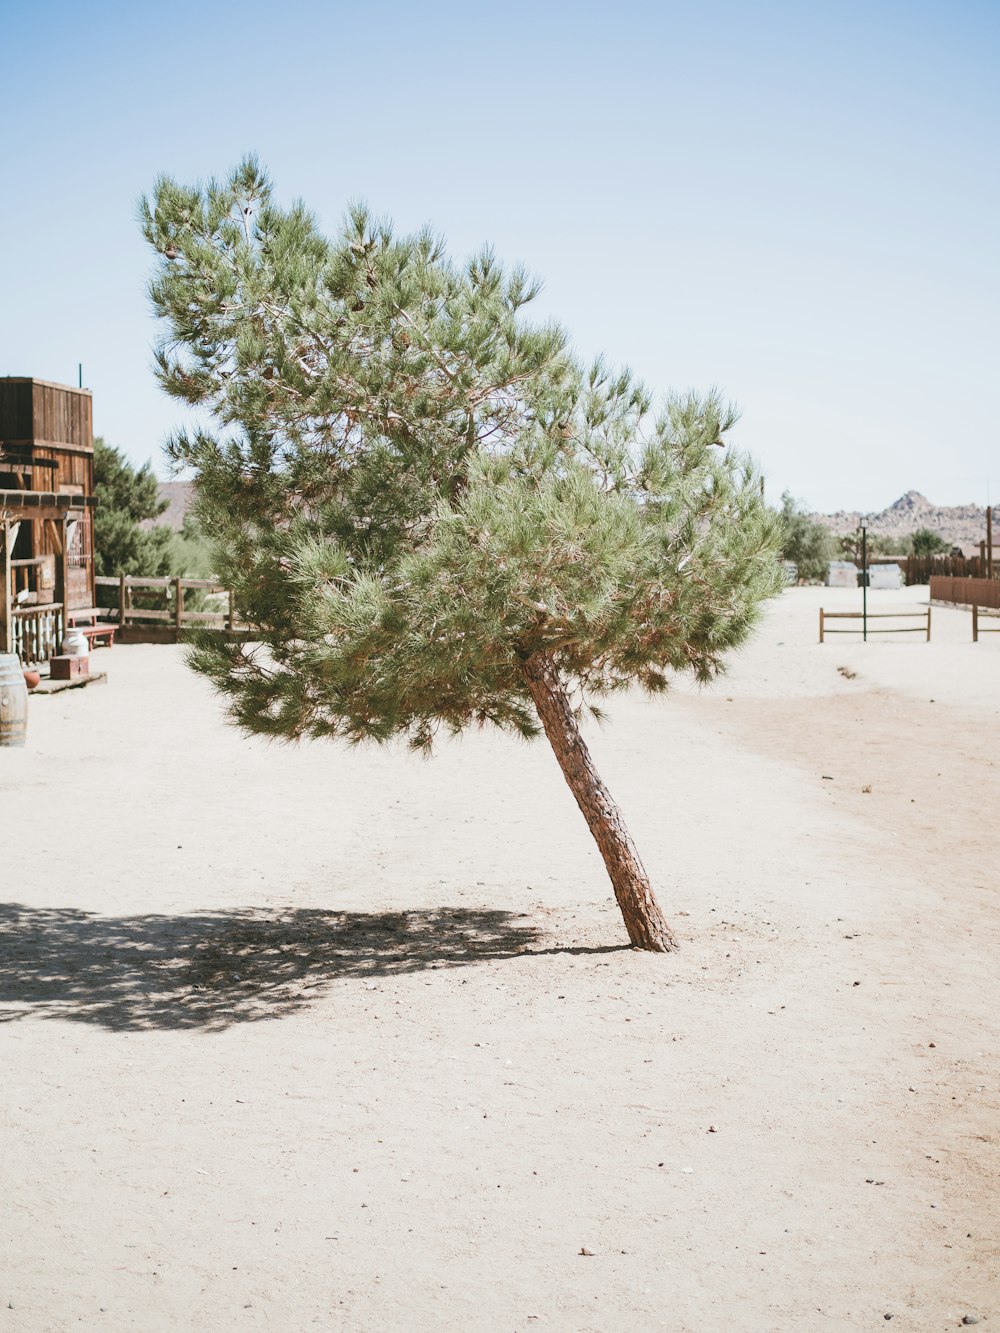 a lone pine tree in the middle of the desert